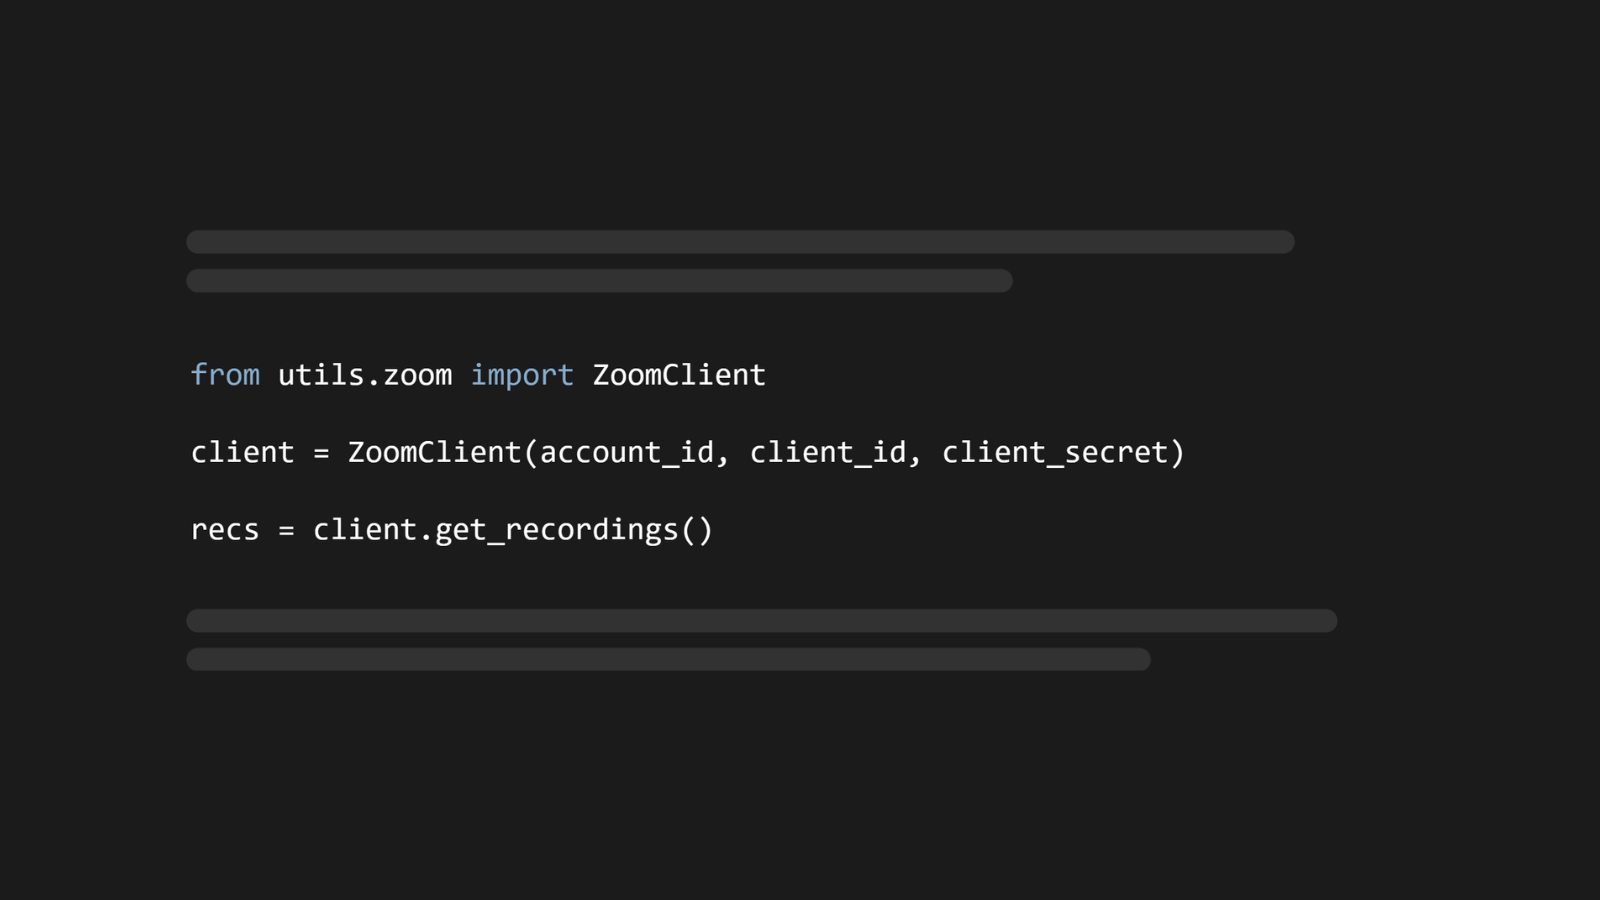 How to get Zoom Transcripts with the Zoom API